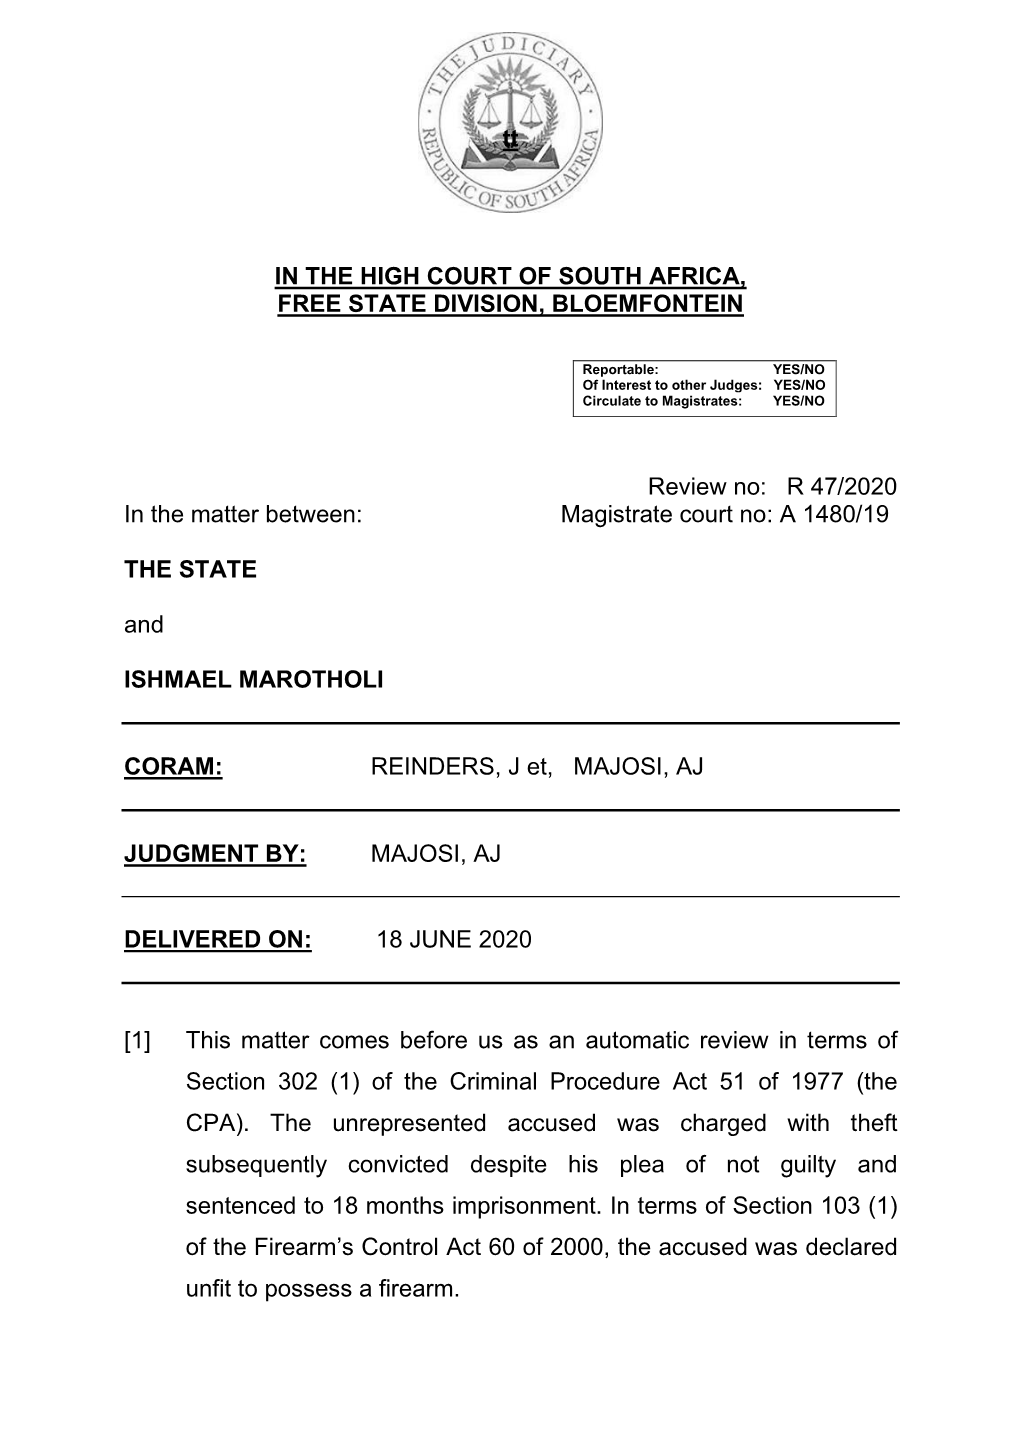 Tt in the HIGH COURT of SOUTH AFRICA, FREE STATE DIVISION, BLOEMFONTEIN Review No: R 47/2020 in the Matter Between: Magistra